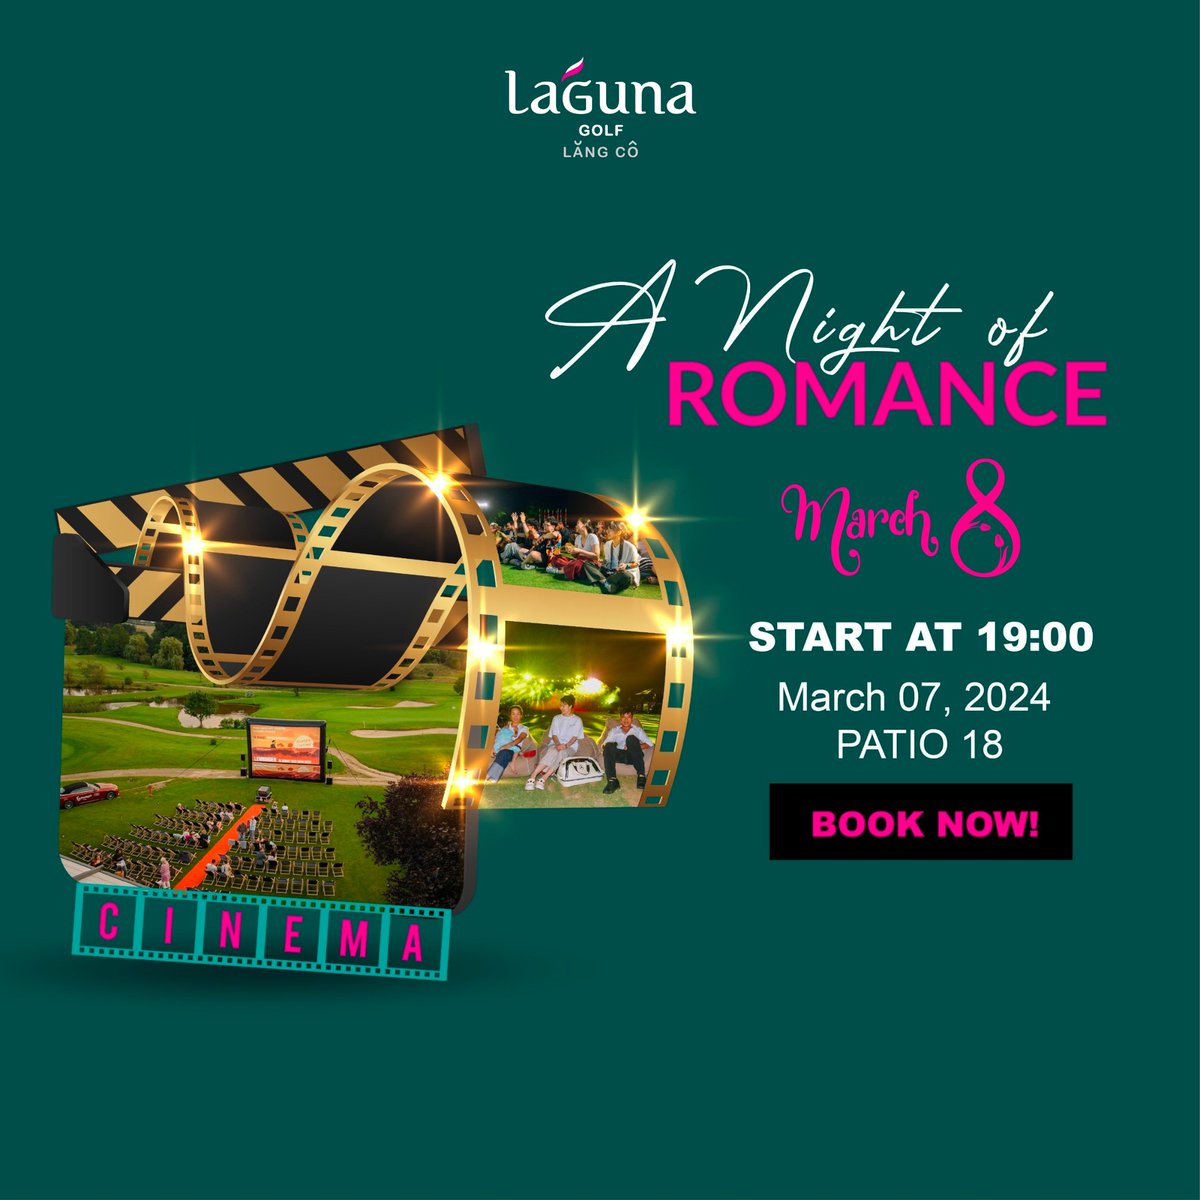 A romantic setting with fresh flowers awaits your 'muse' at Laguna Lăng Cô Golf Course's 18th hole. 📍 Location: 18th hole, Laguna Lăng Cô Golf Course ⏰ Time: 19:00 - 21:30 Save the date and join us for a memorable evening!